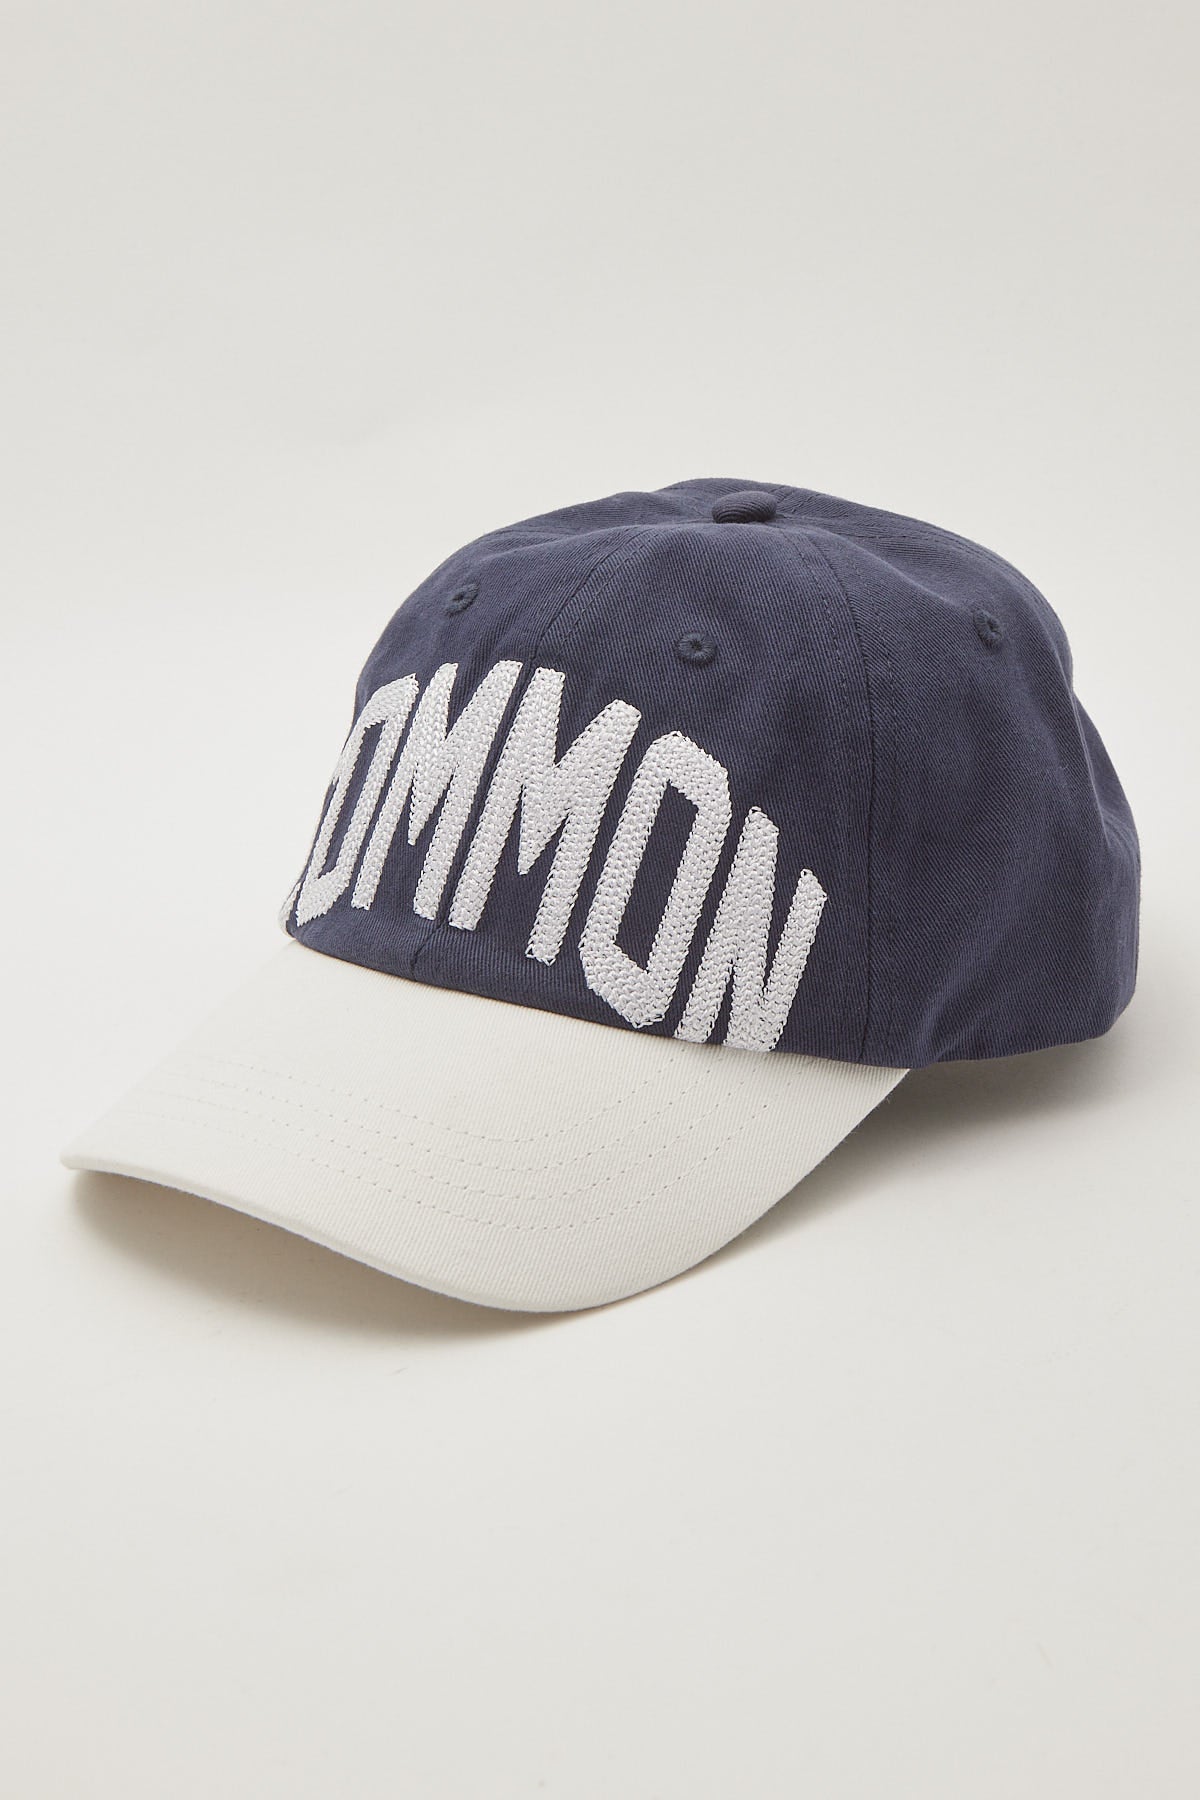 Common Need College Two Tone Dad Cap Navy